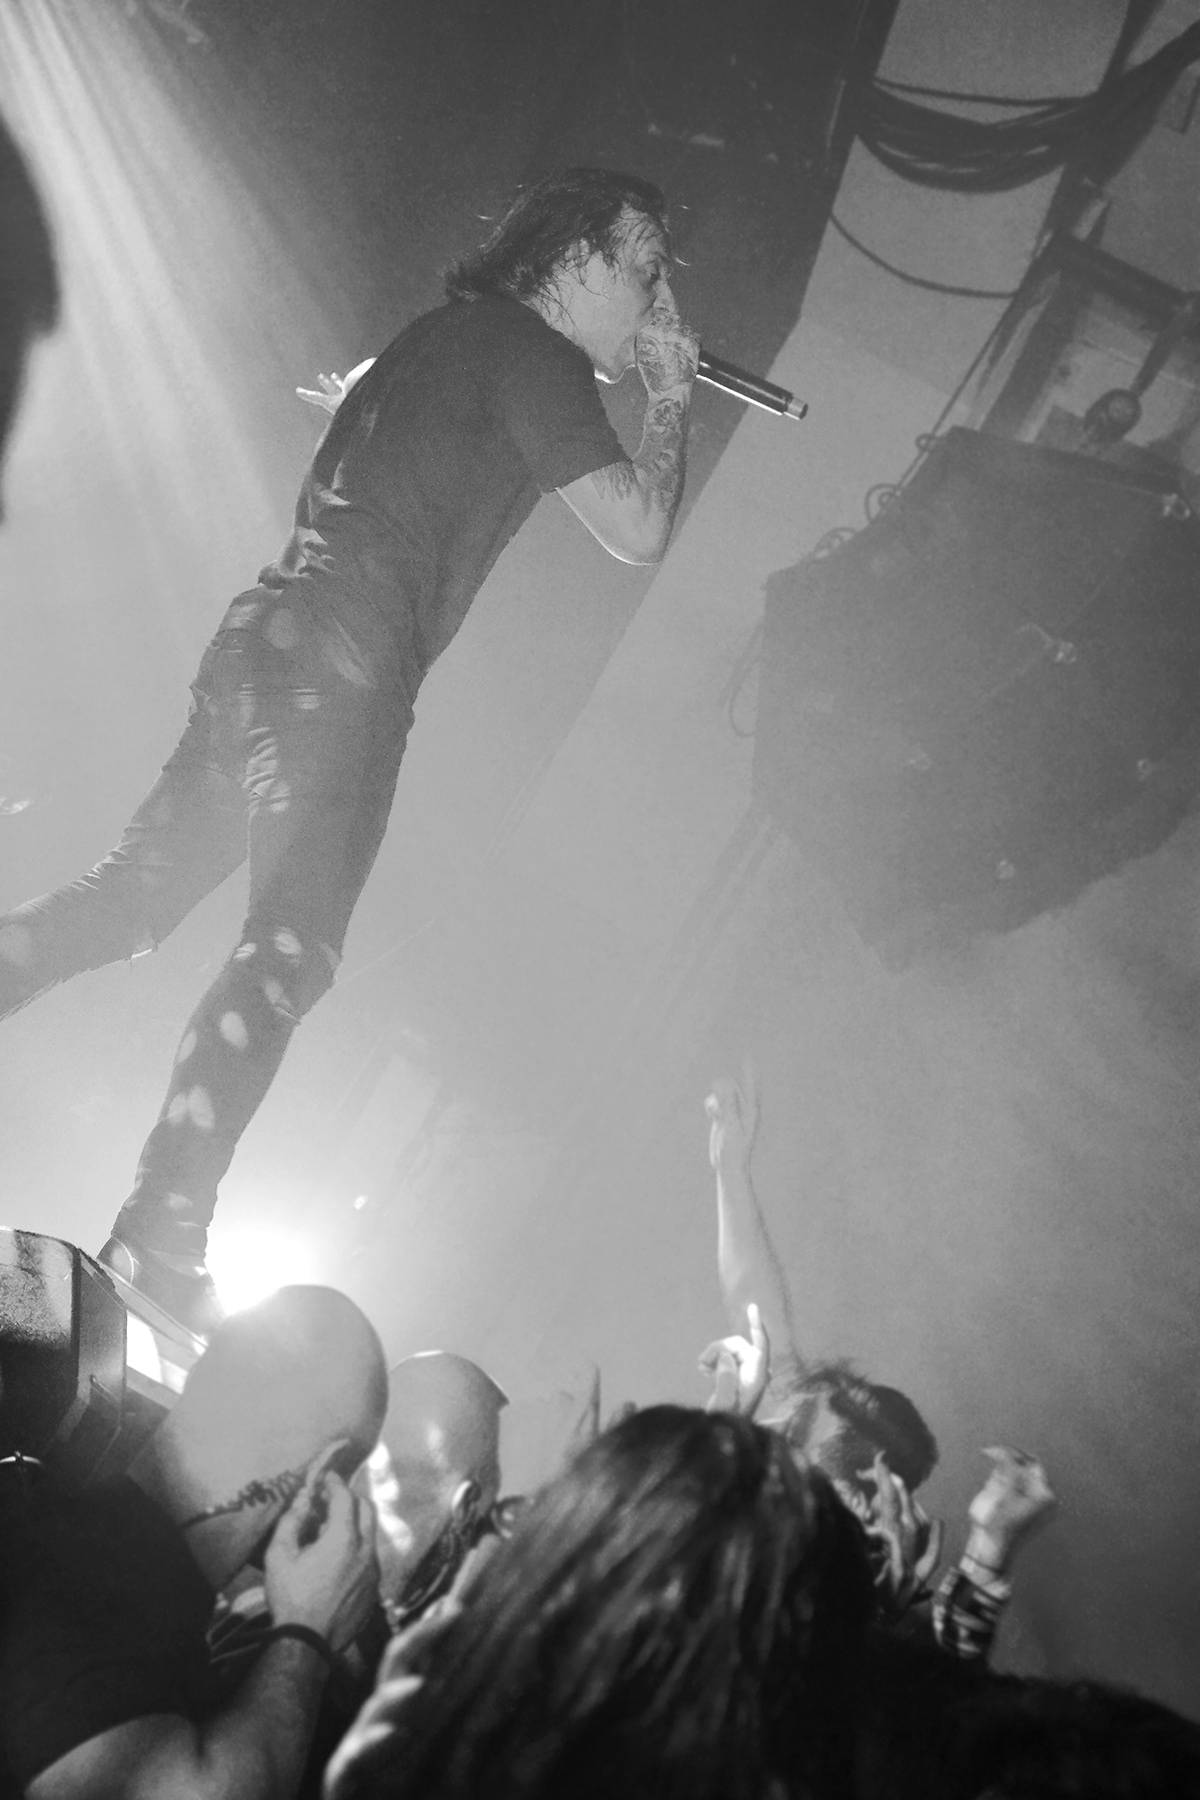 architects blessthefall everytimeidie couterparts Hardcore concert cz prague